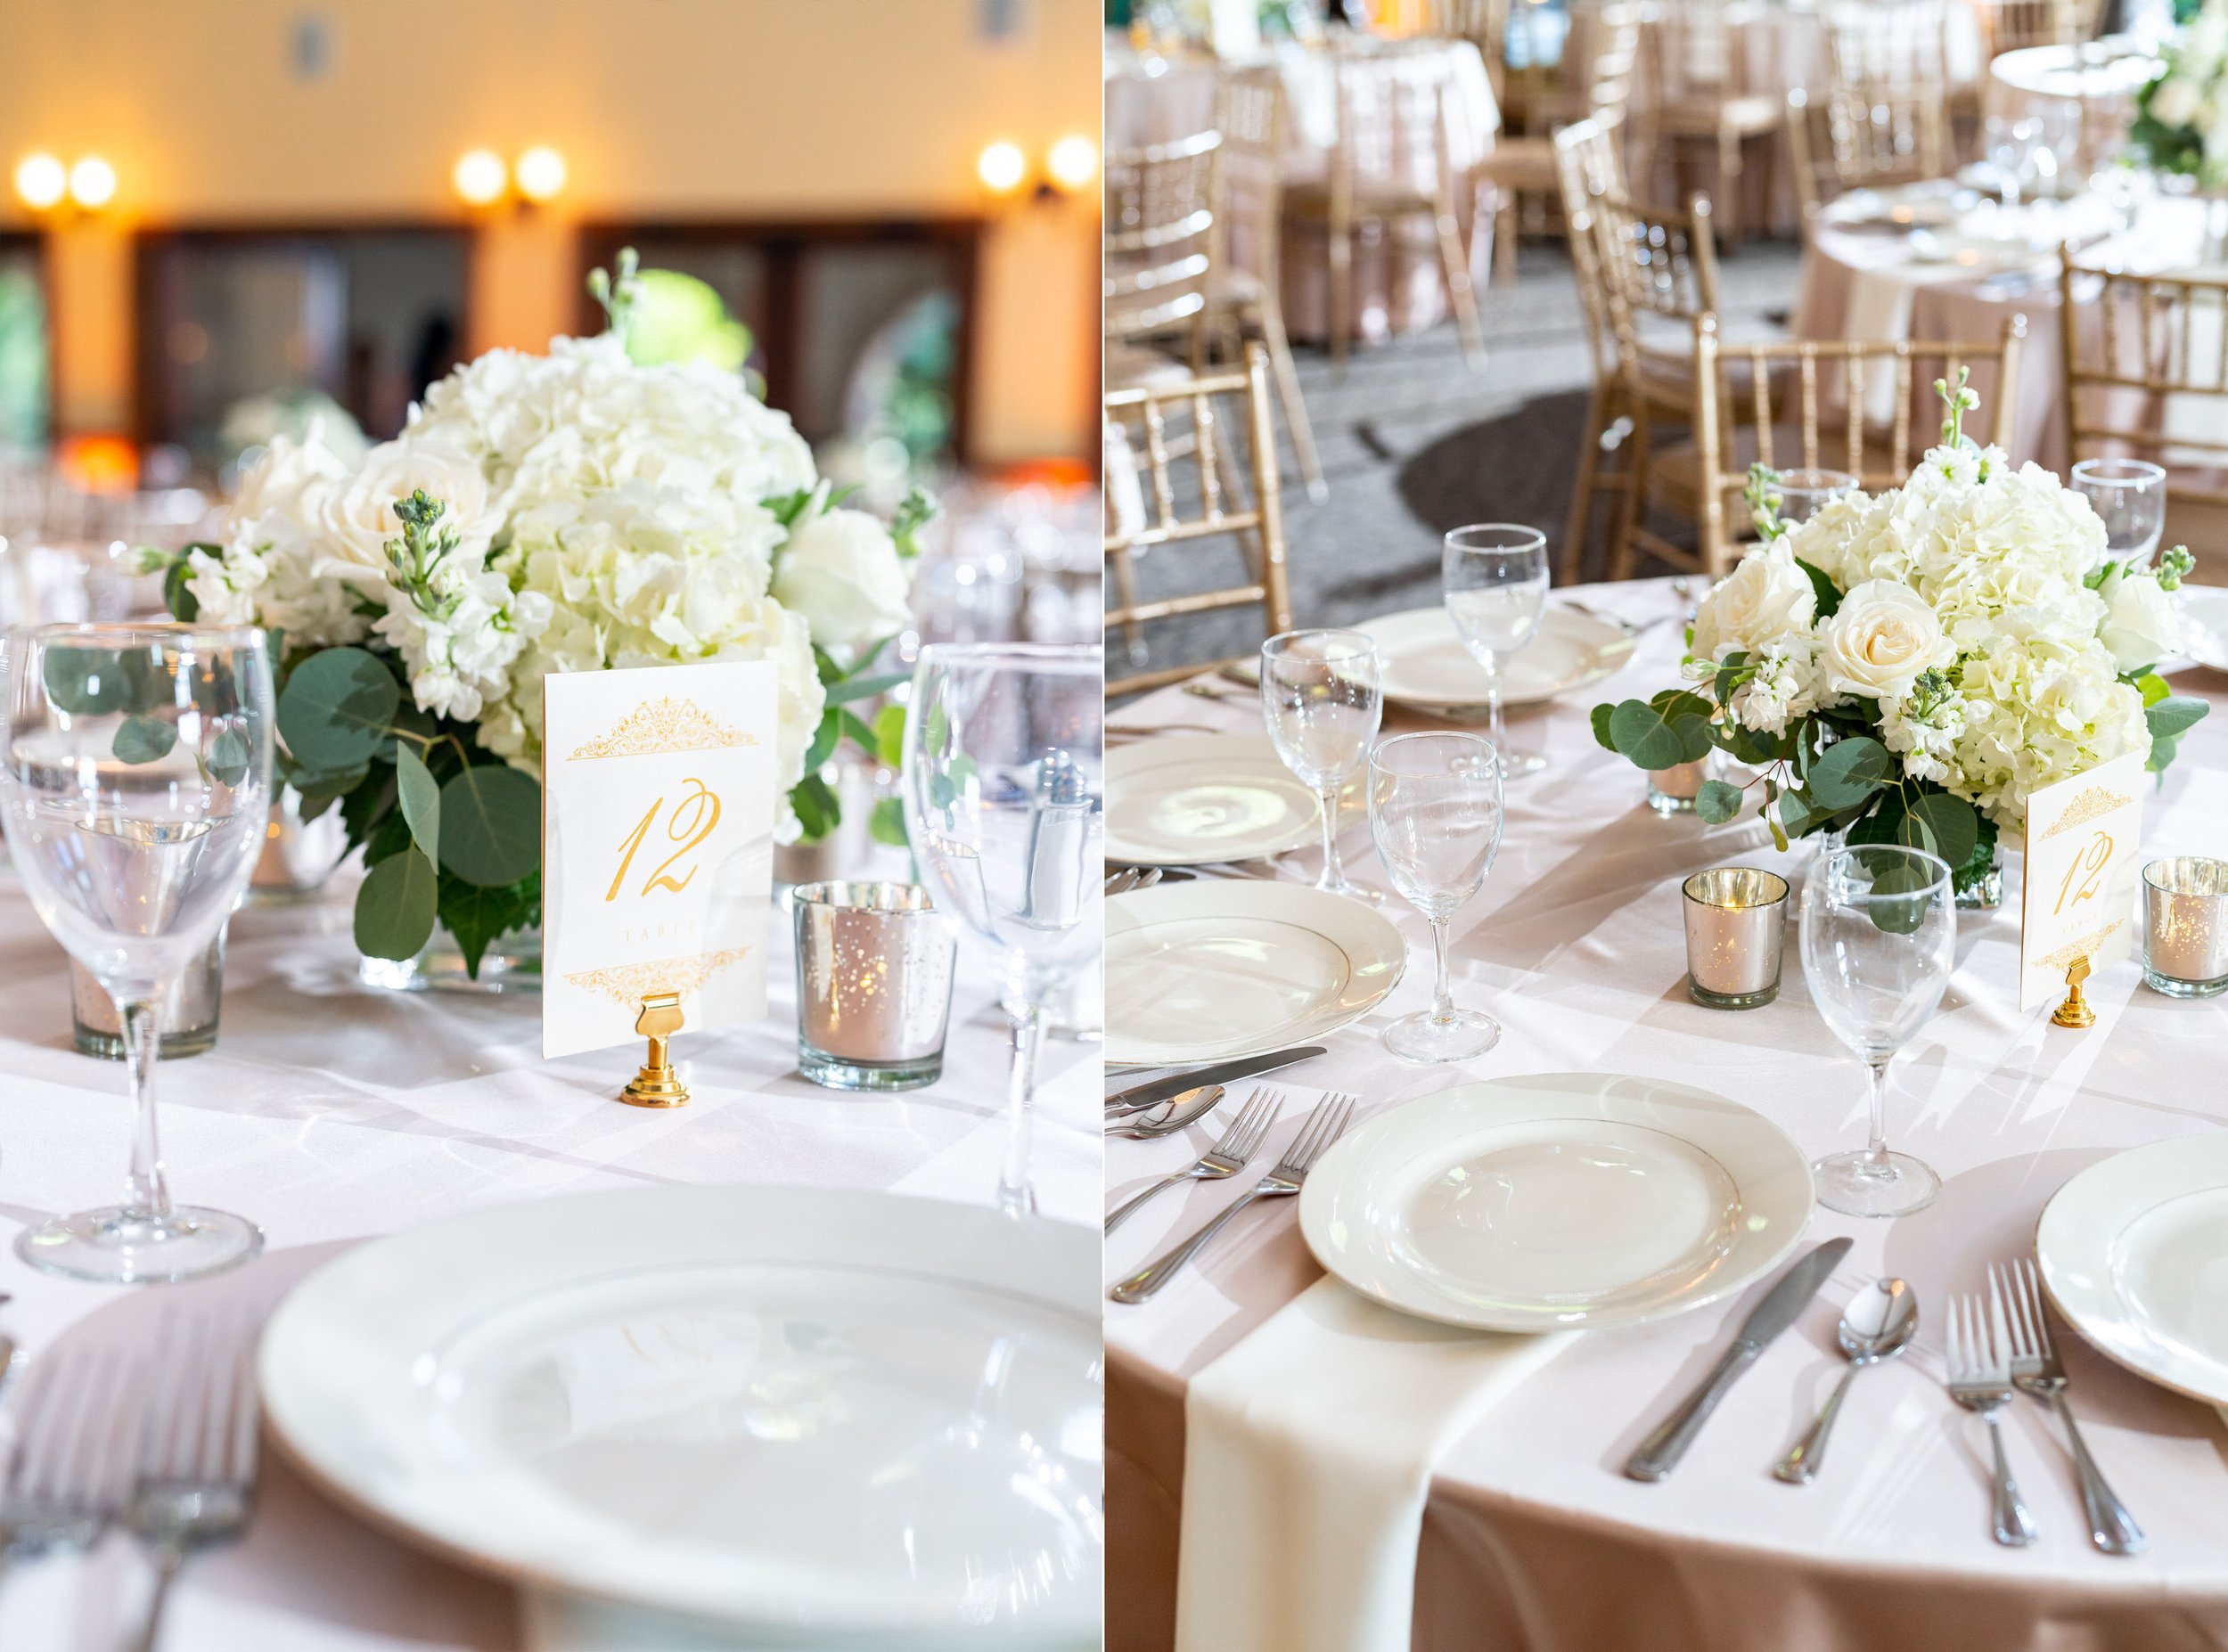 flowers, table decor and table numbers